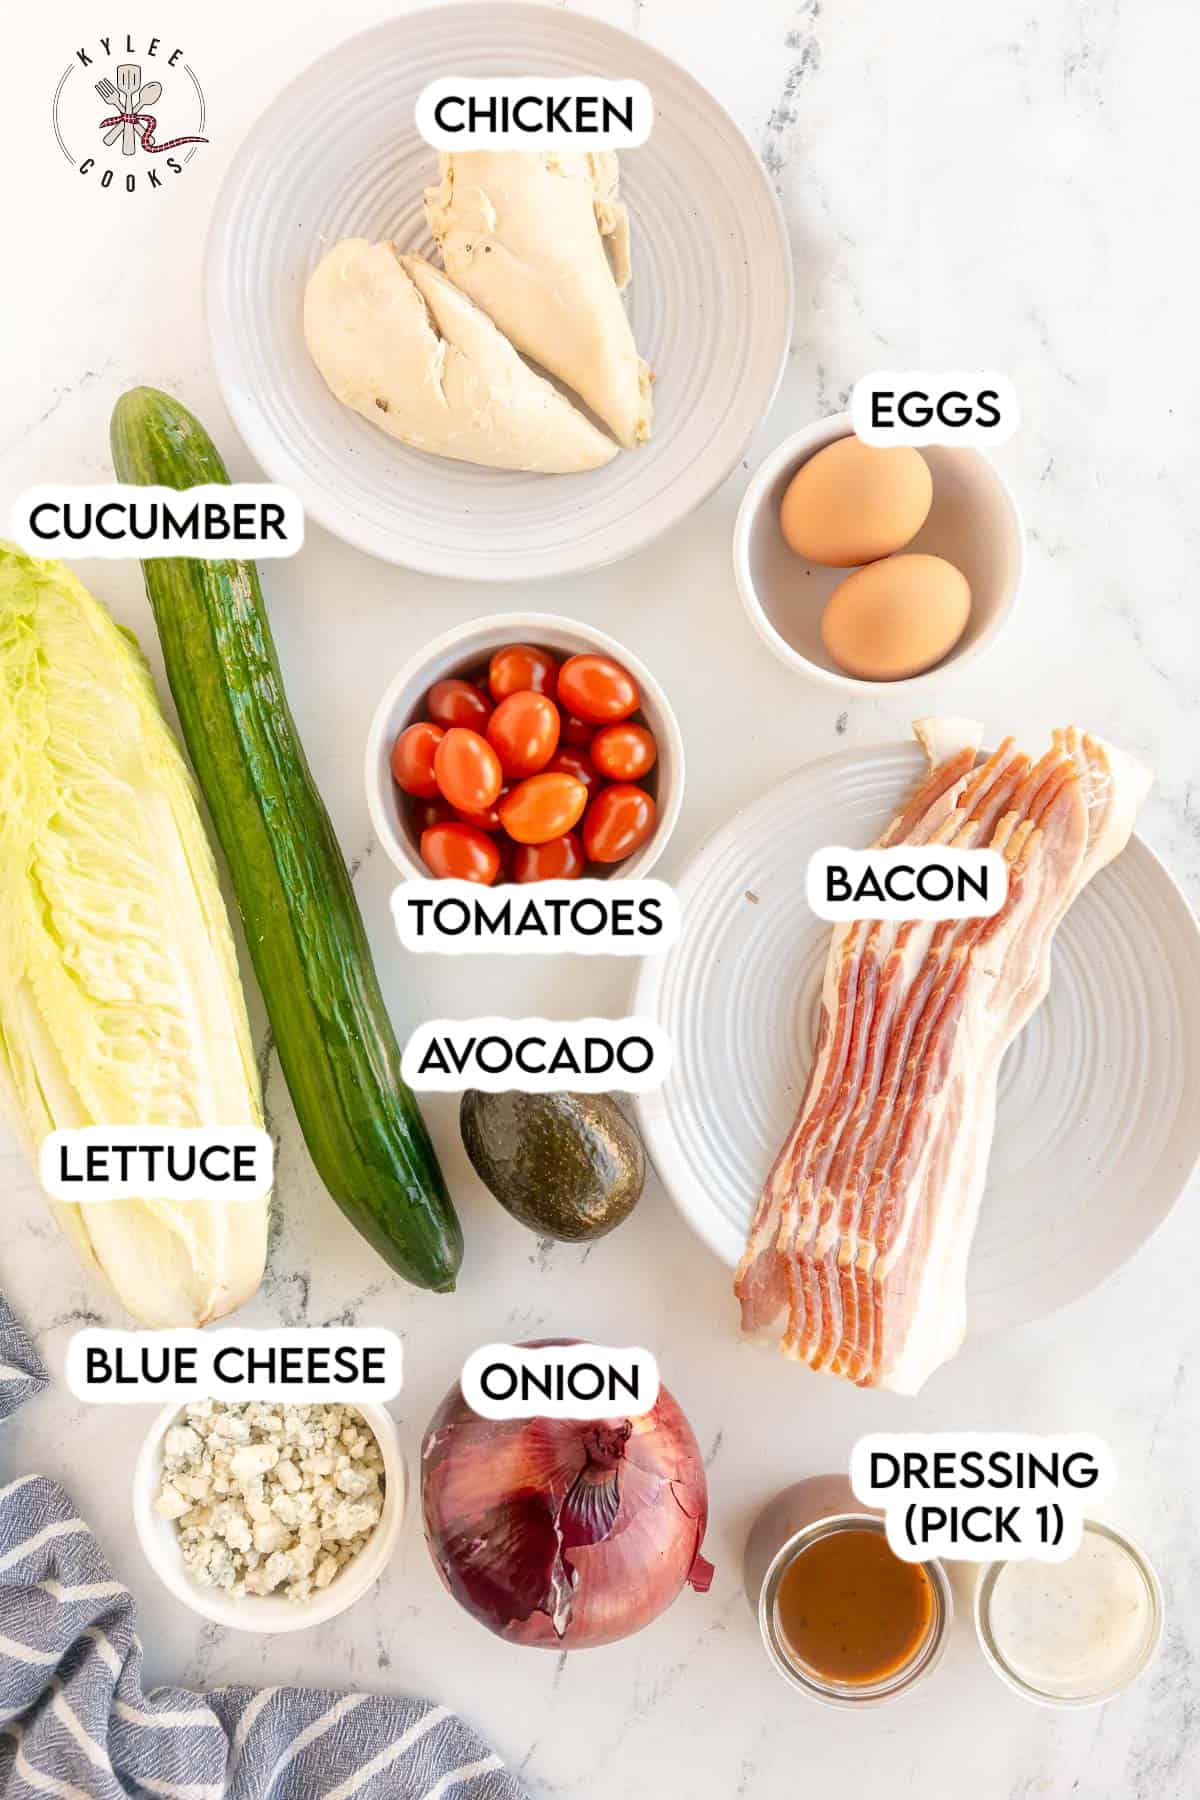 A plate with ingredients for a chicken Cobb salad.